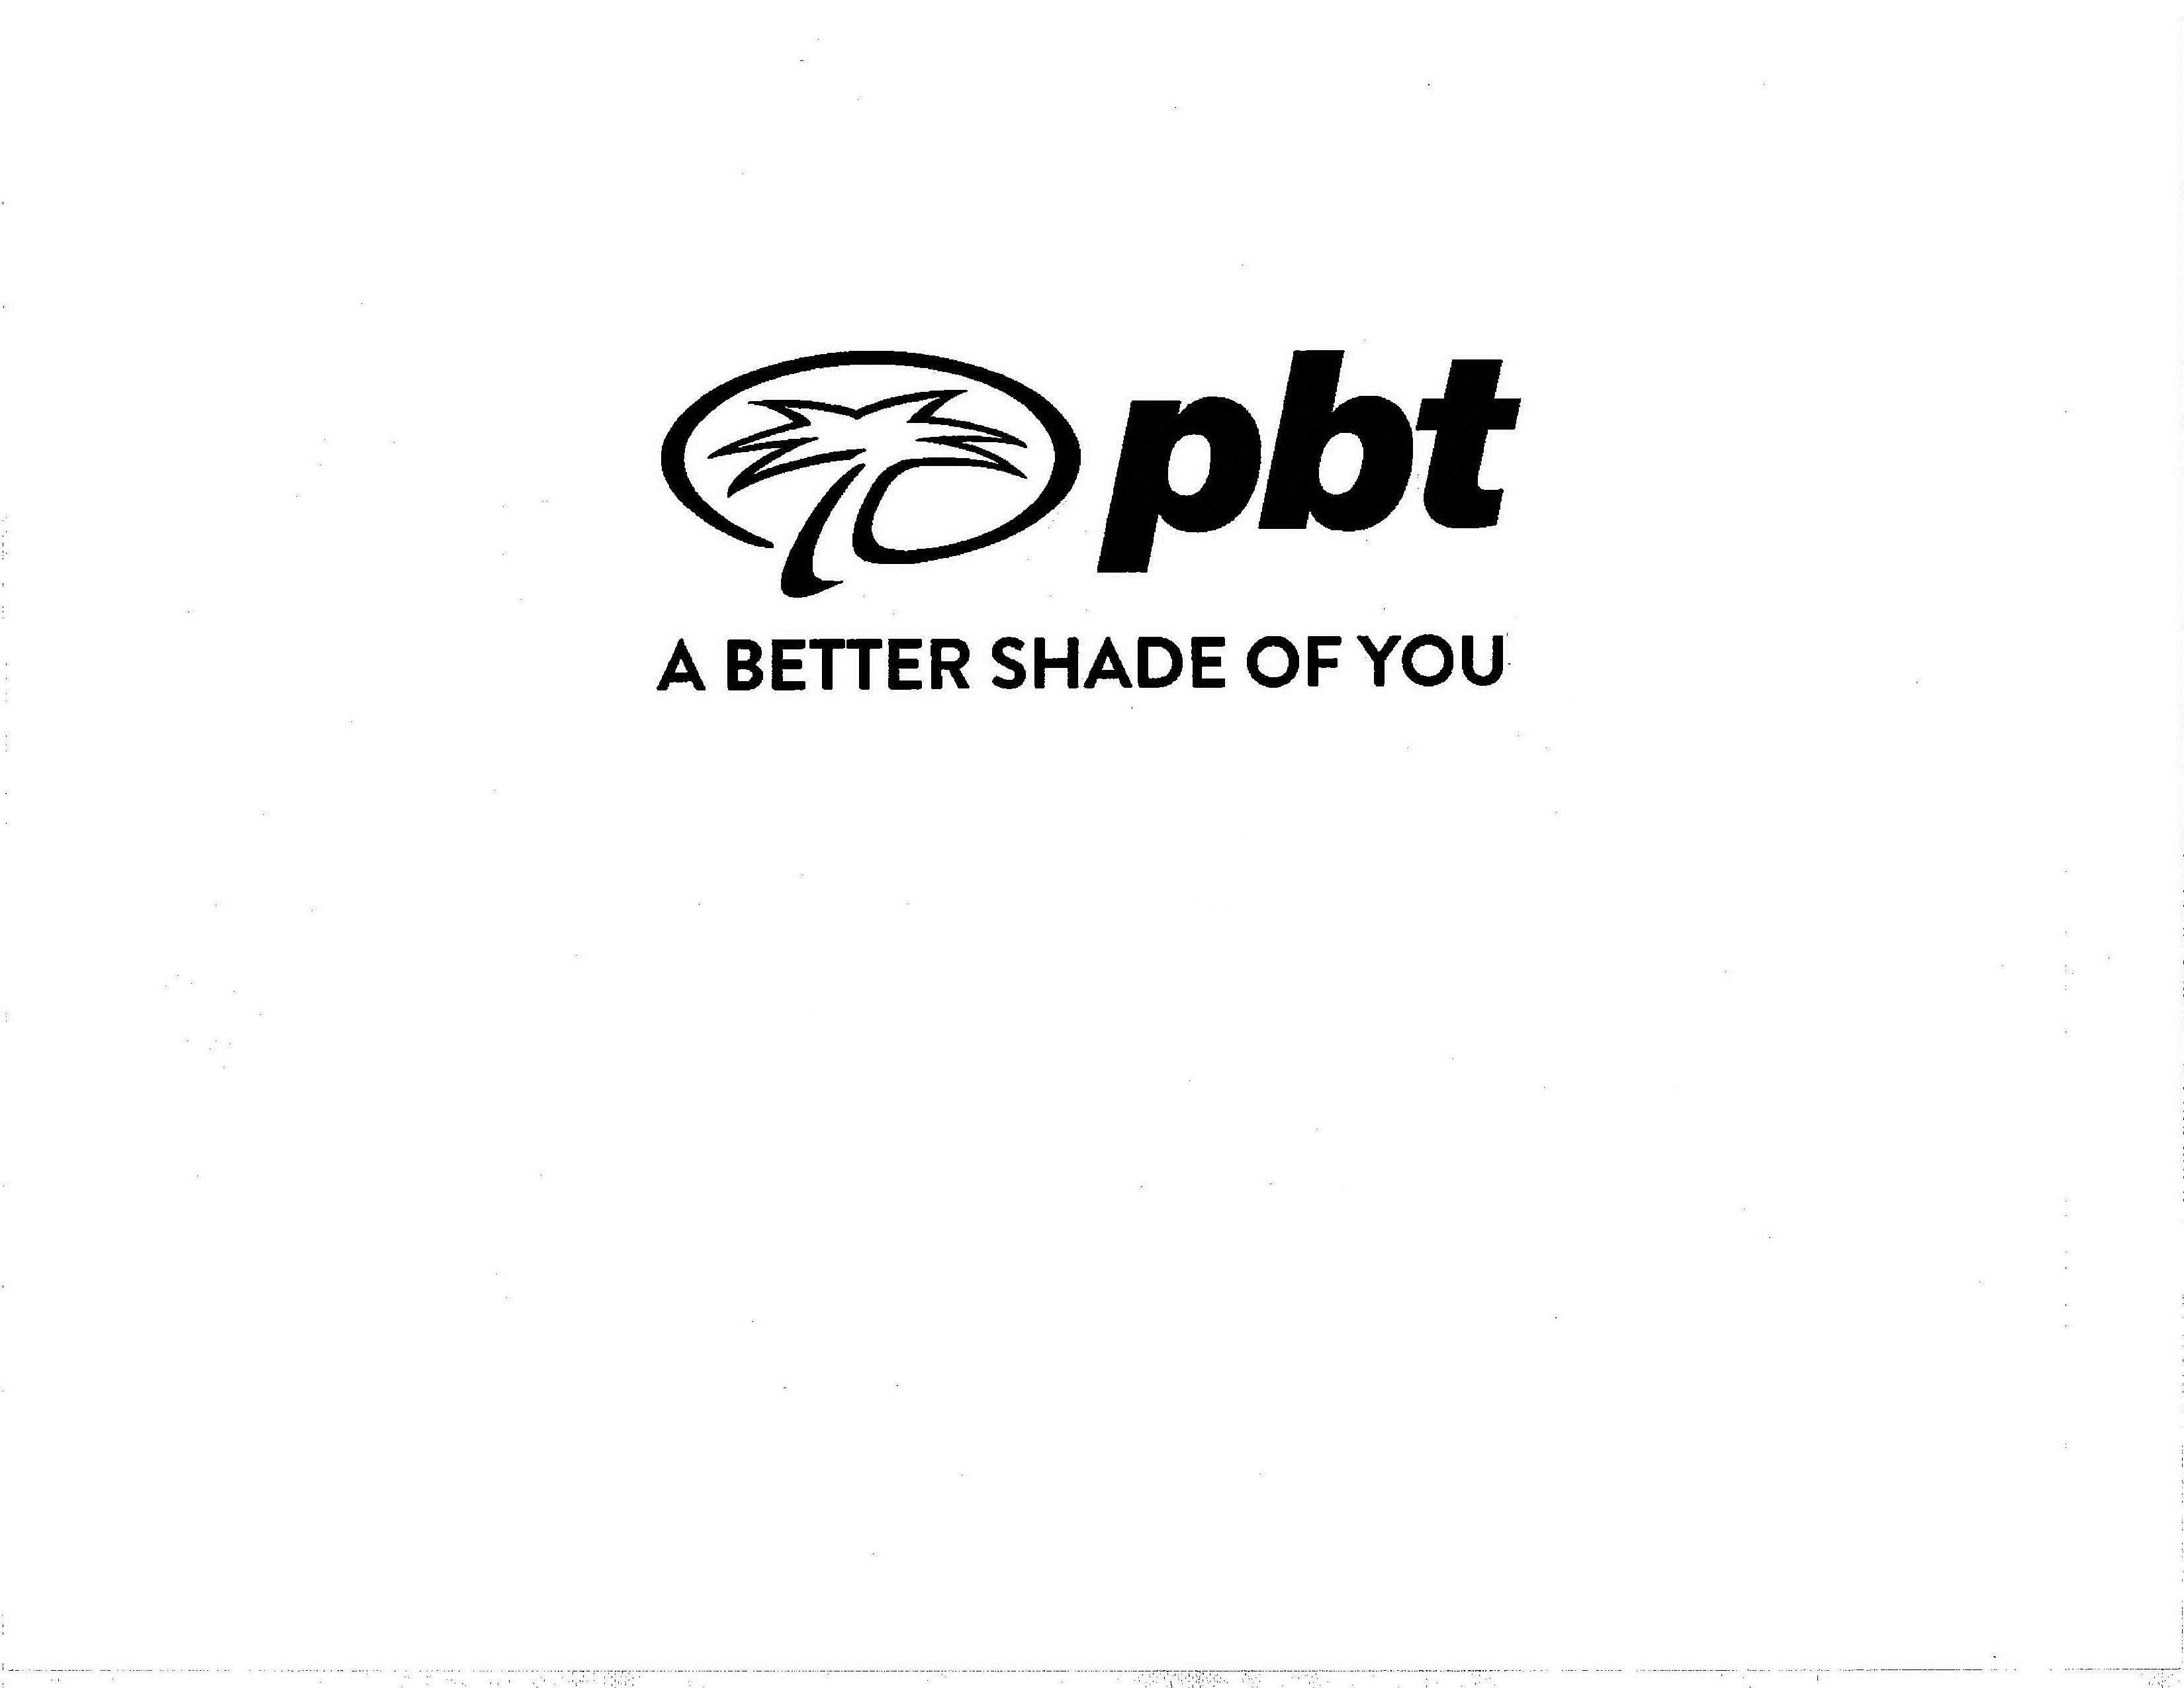  PBT A BETTER SHADE OF YOU